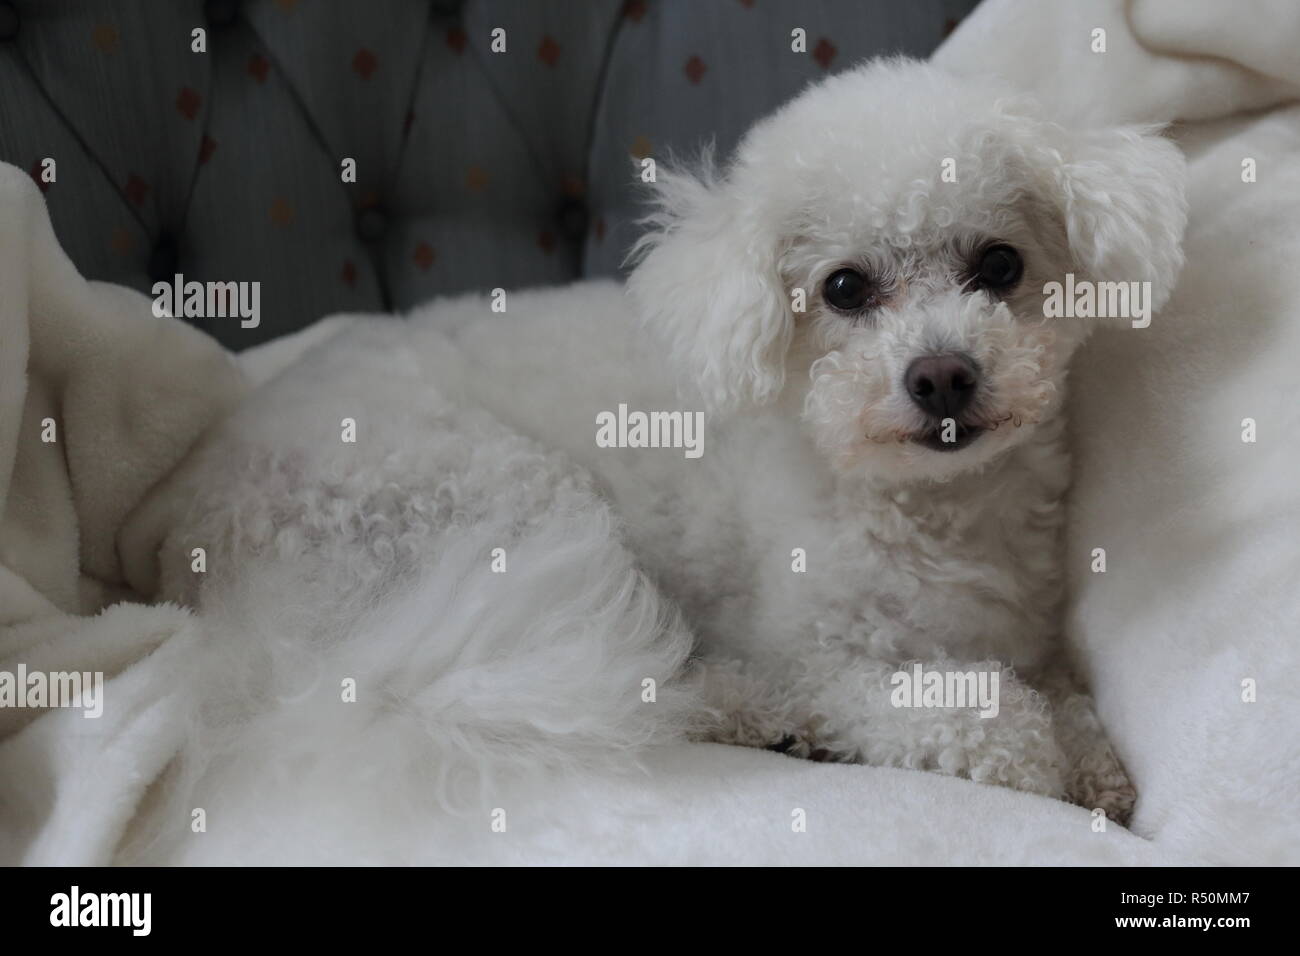 Old Bichon Frise posing on couch. Stock Photo